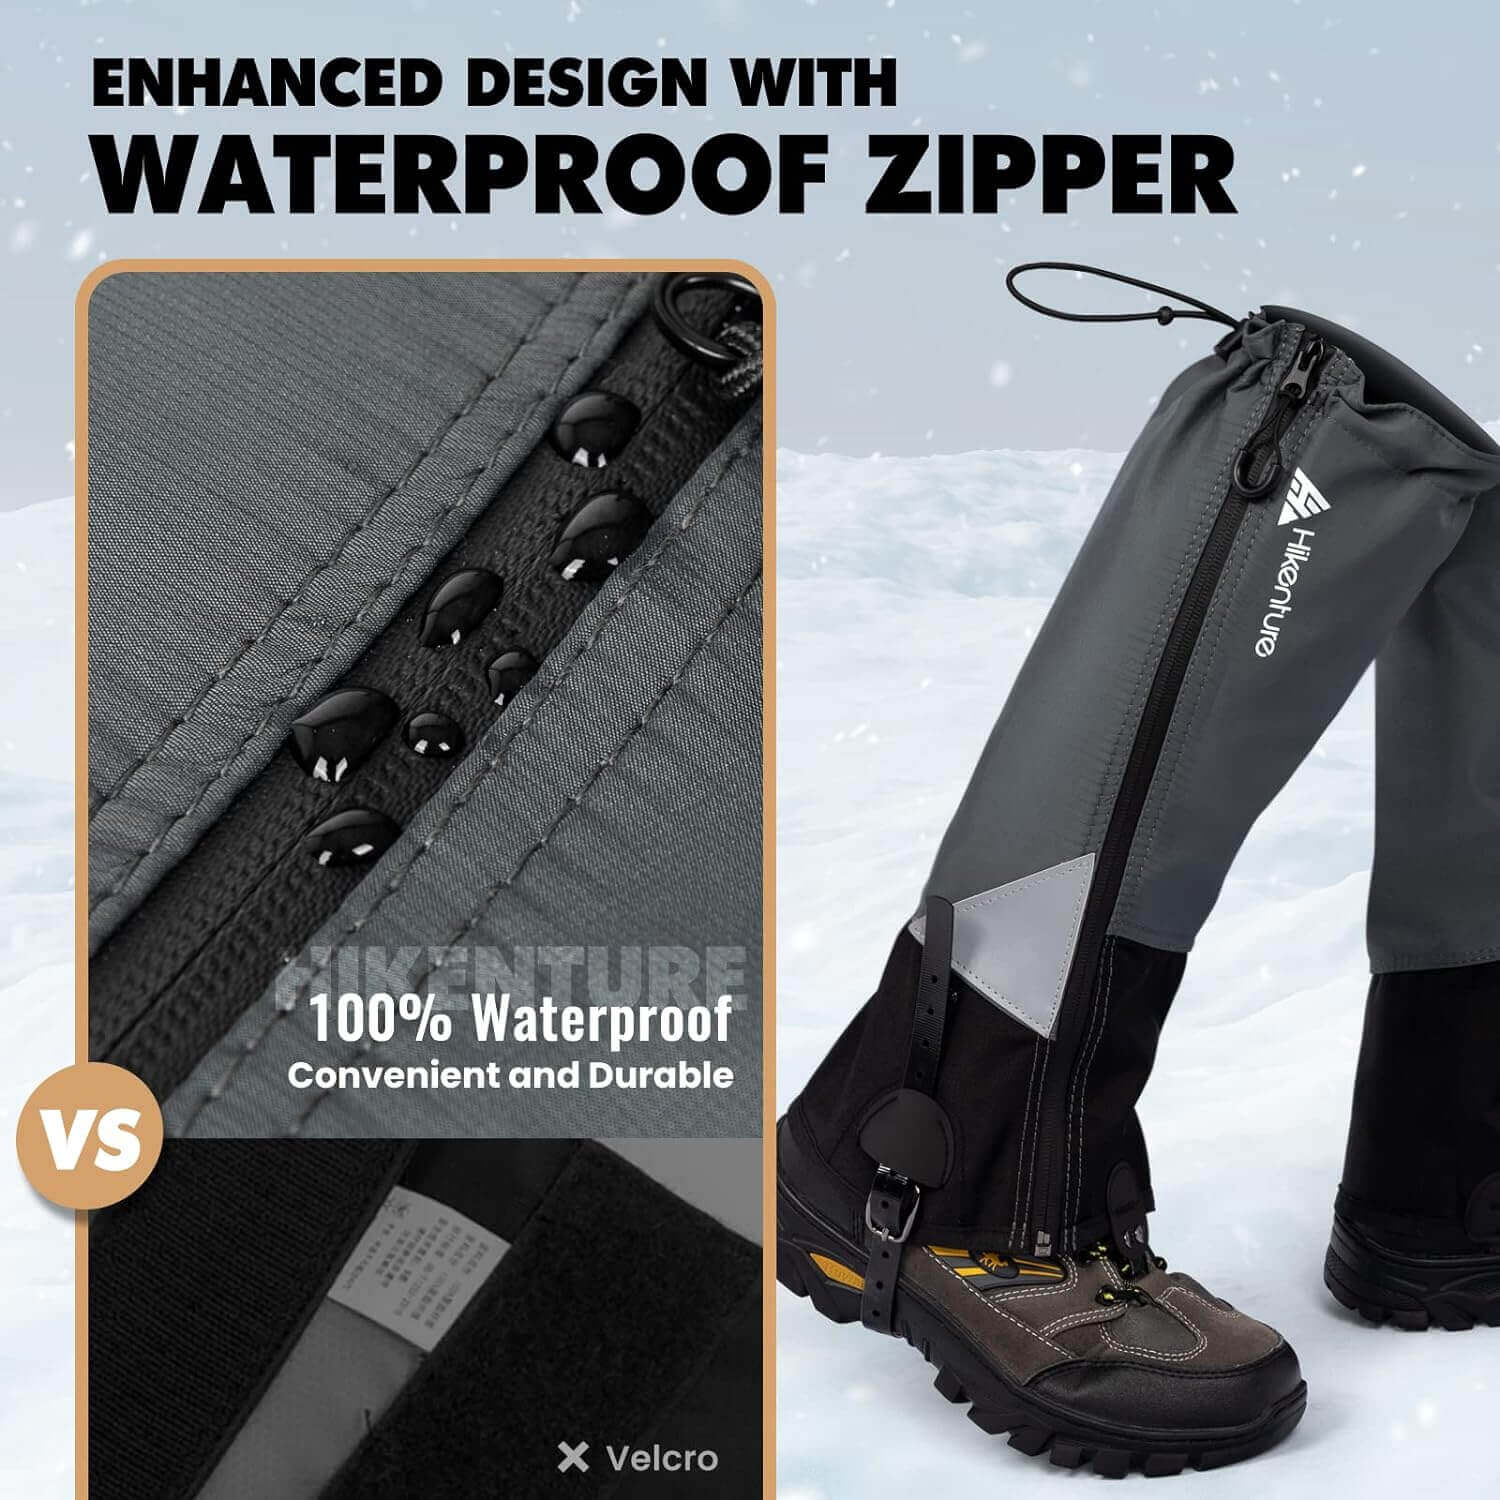 Shop The Latest >Hiking Waterproof, Leg Gaiters with Upgraded Zipper Design > *Only $33.74*> From The Top Brand > *Hikenturel* > Shop Now and Get Free Shipping On Orders Over $45.00 >*Shop Earth Foot*